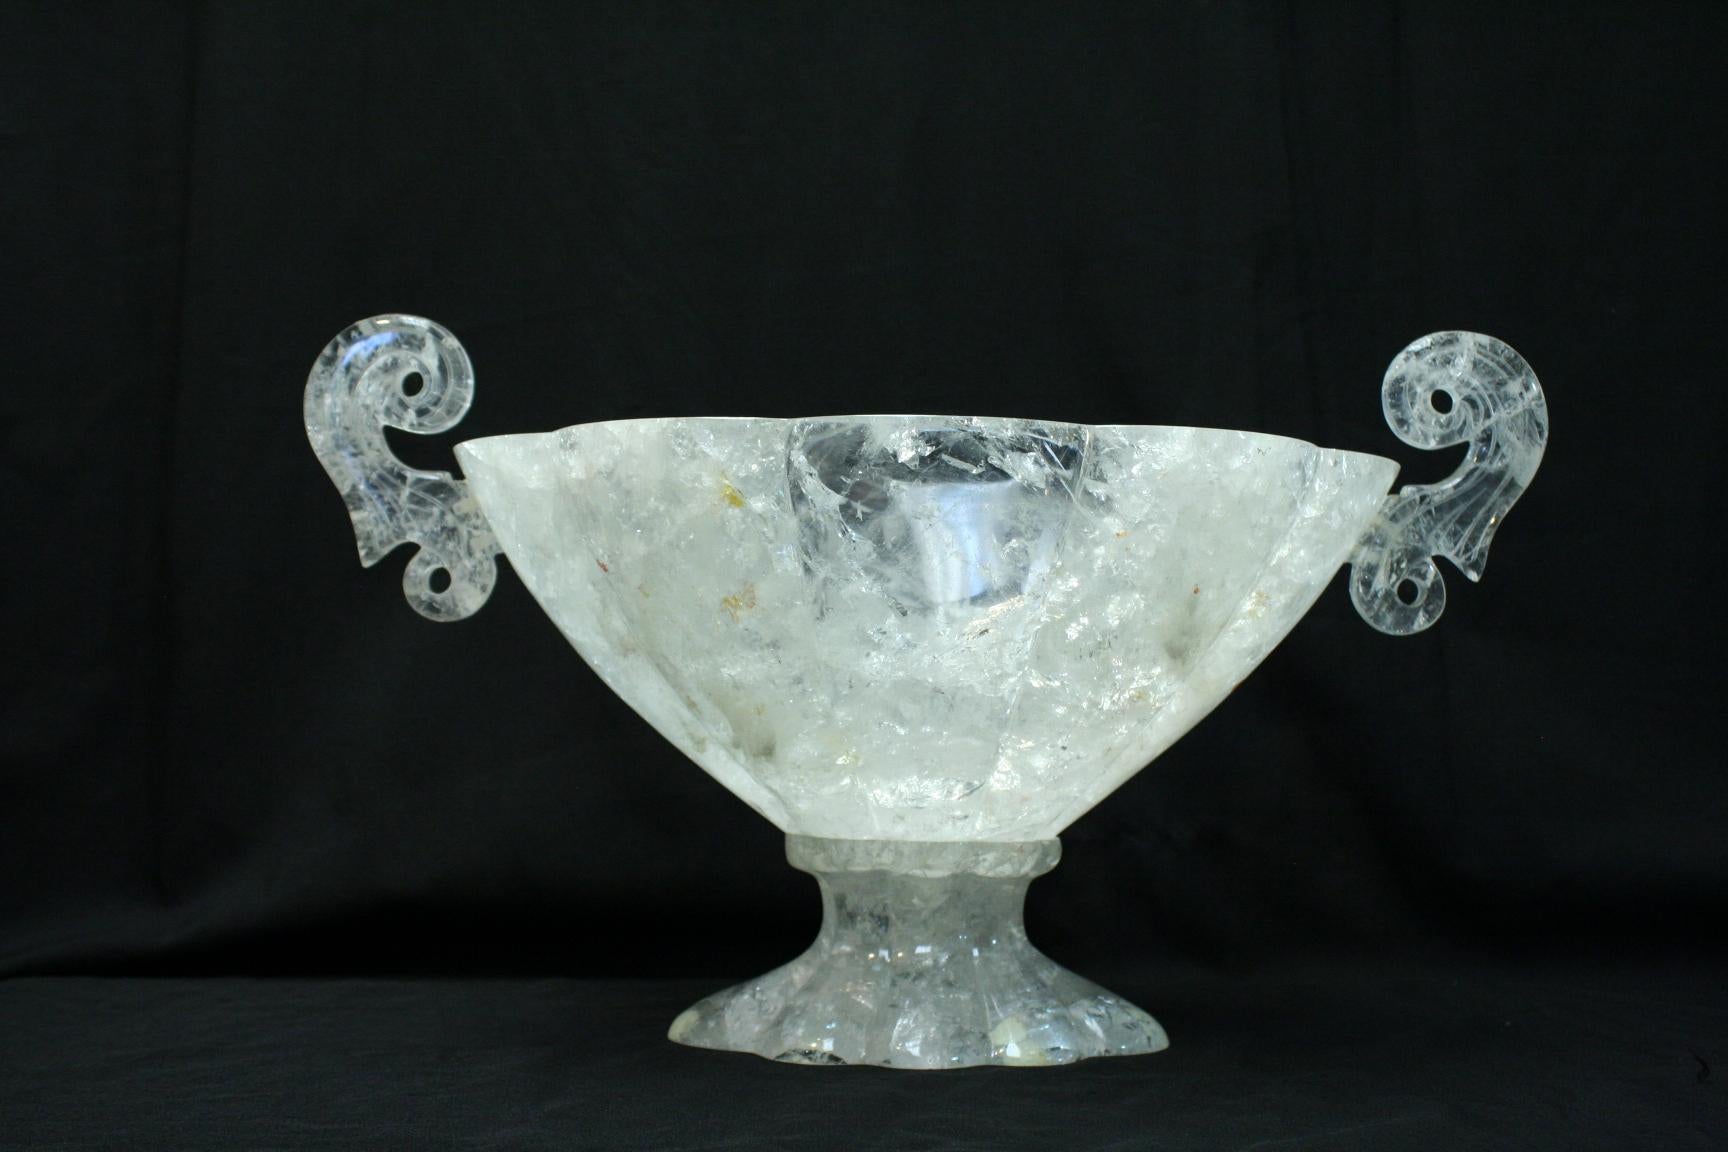 Oval Rock Crystal Centerpiece with Handles In Excellent Condition For Sale In Cypress, CA